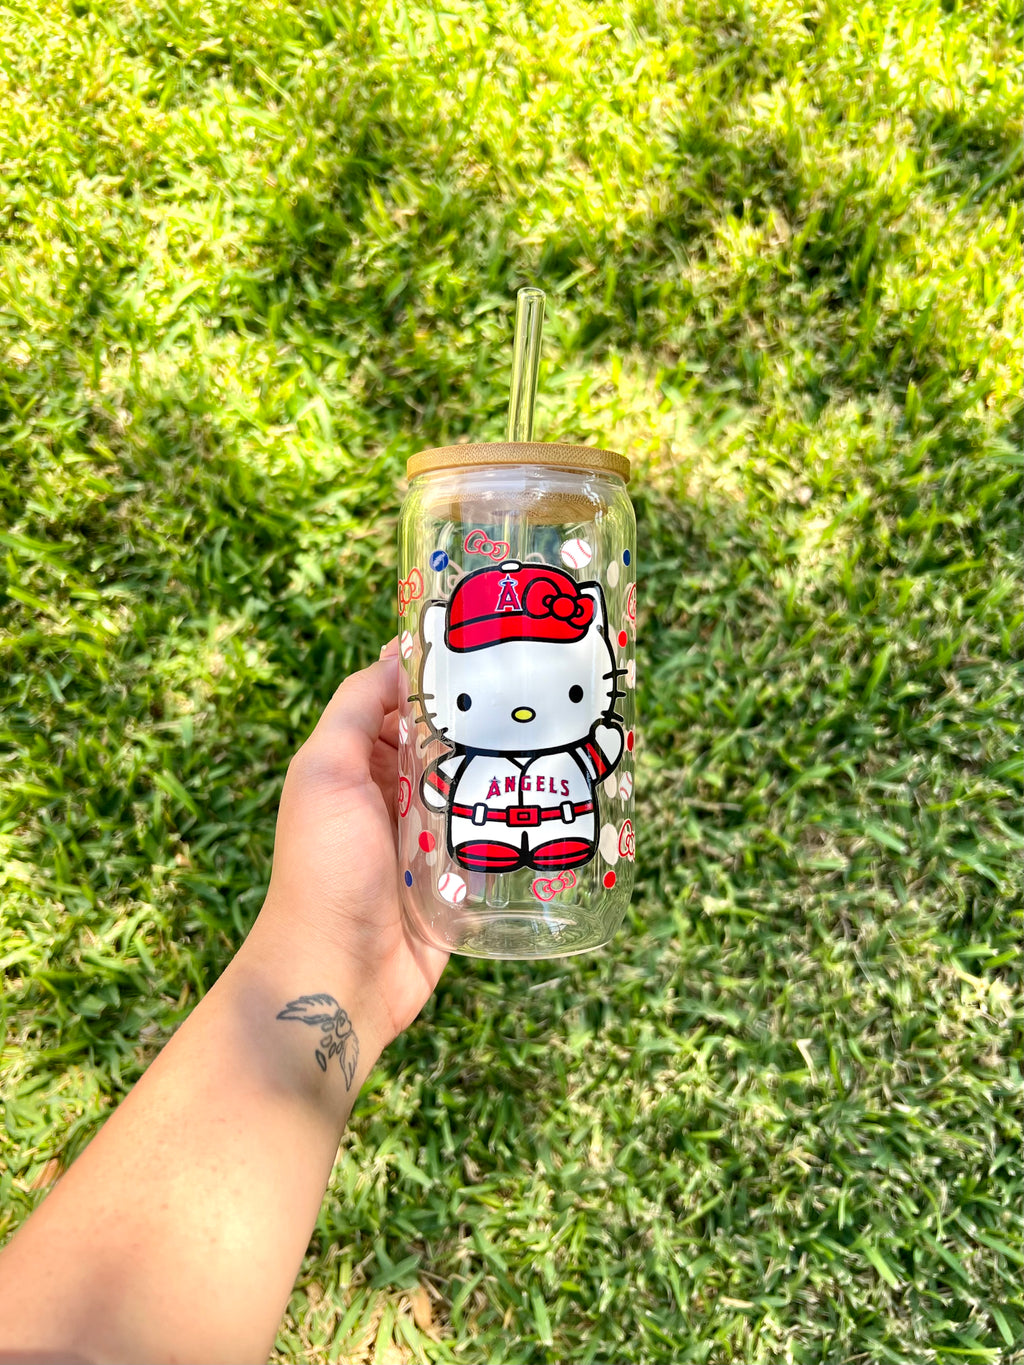 Kitty Angels 16oz Glass Cup